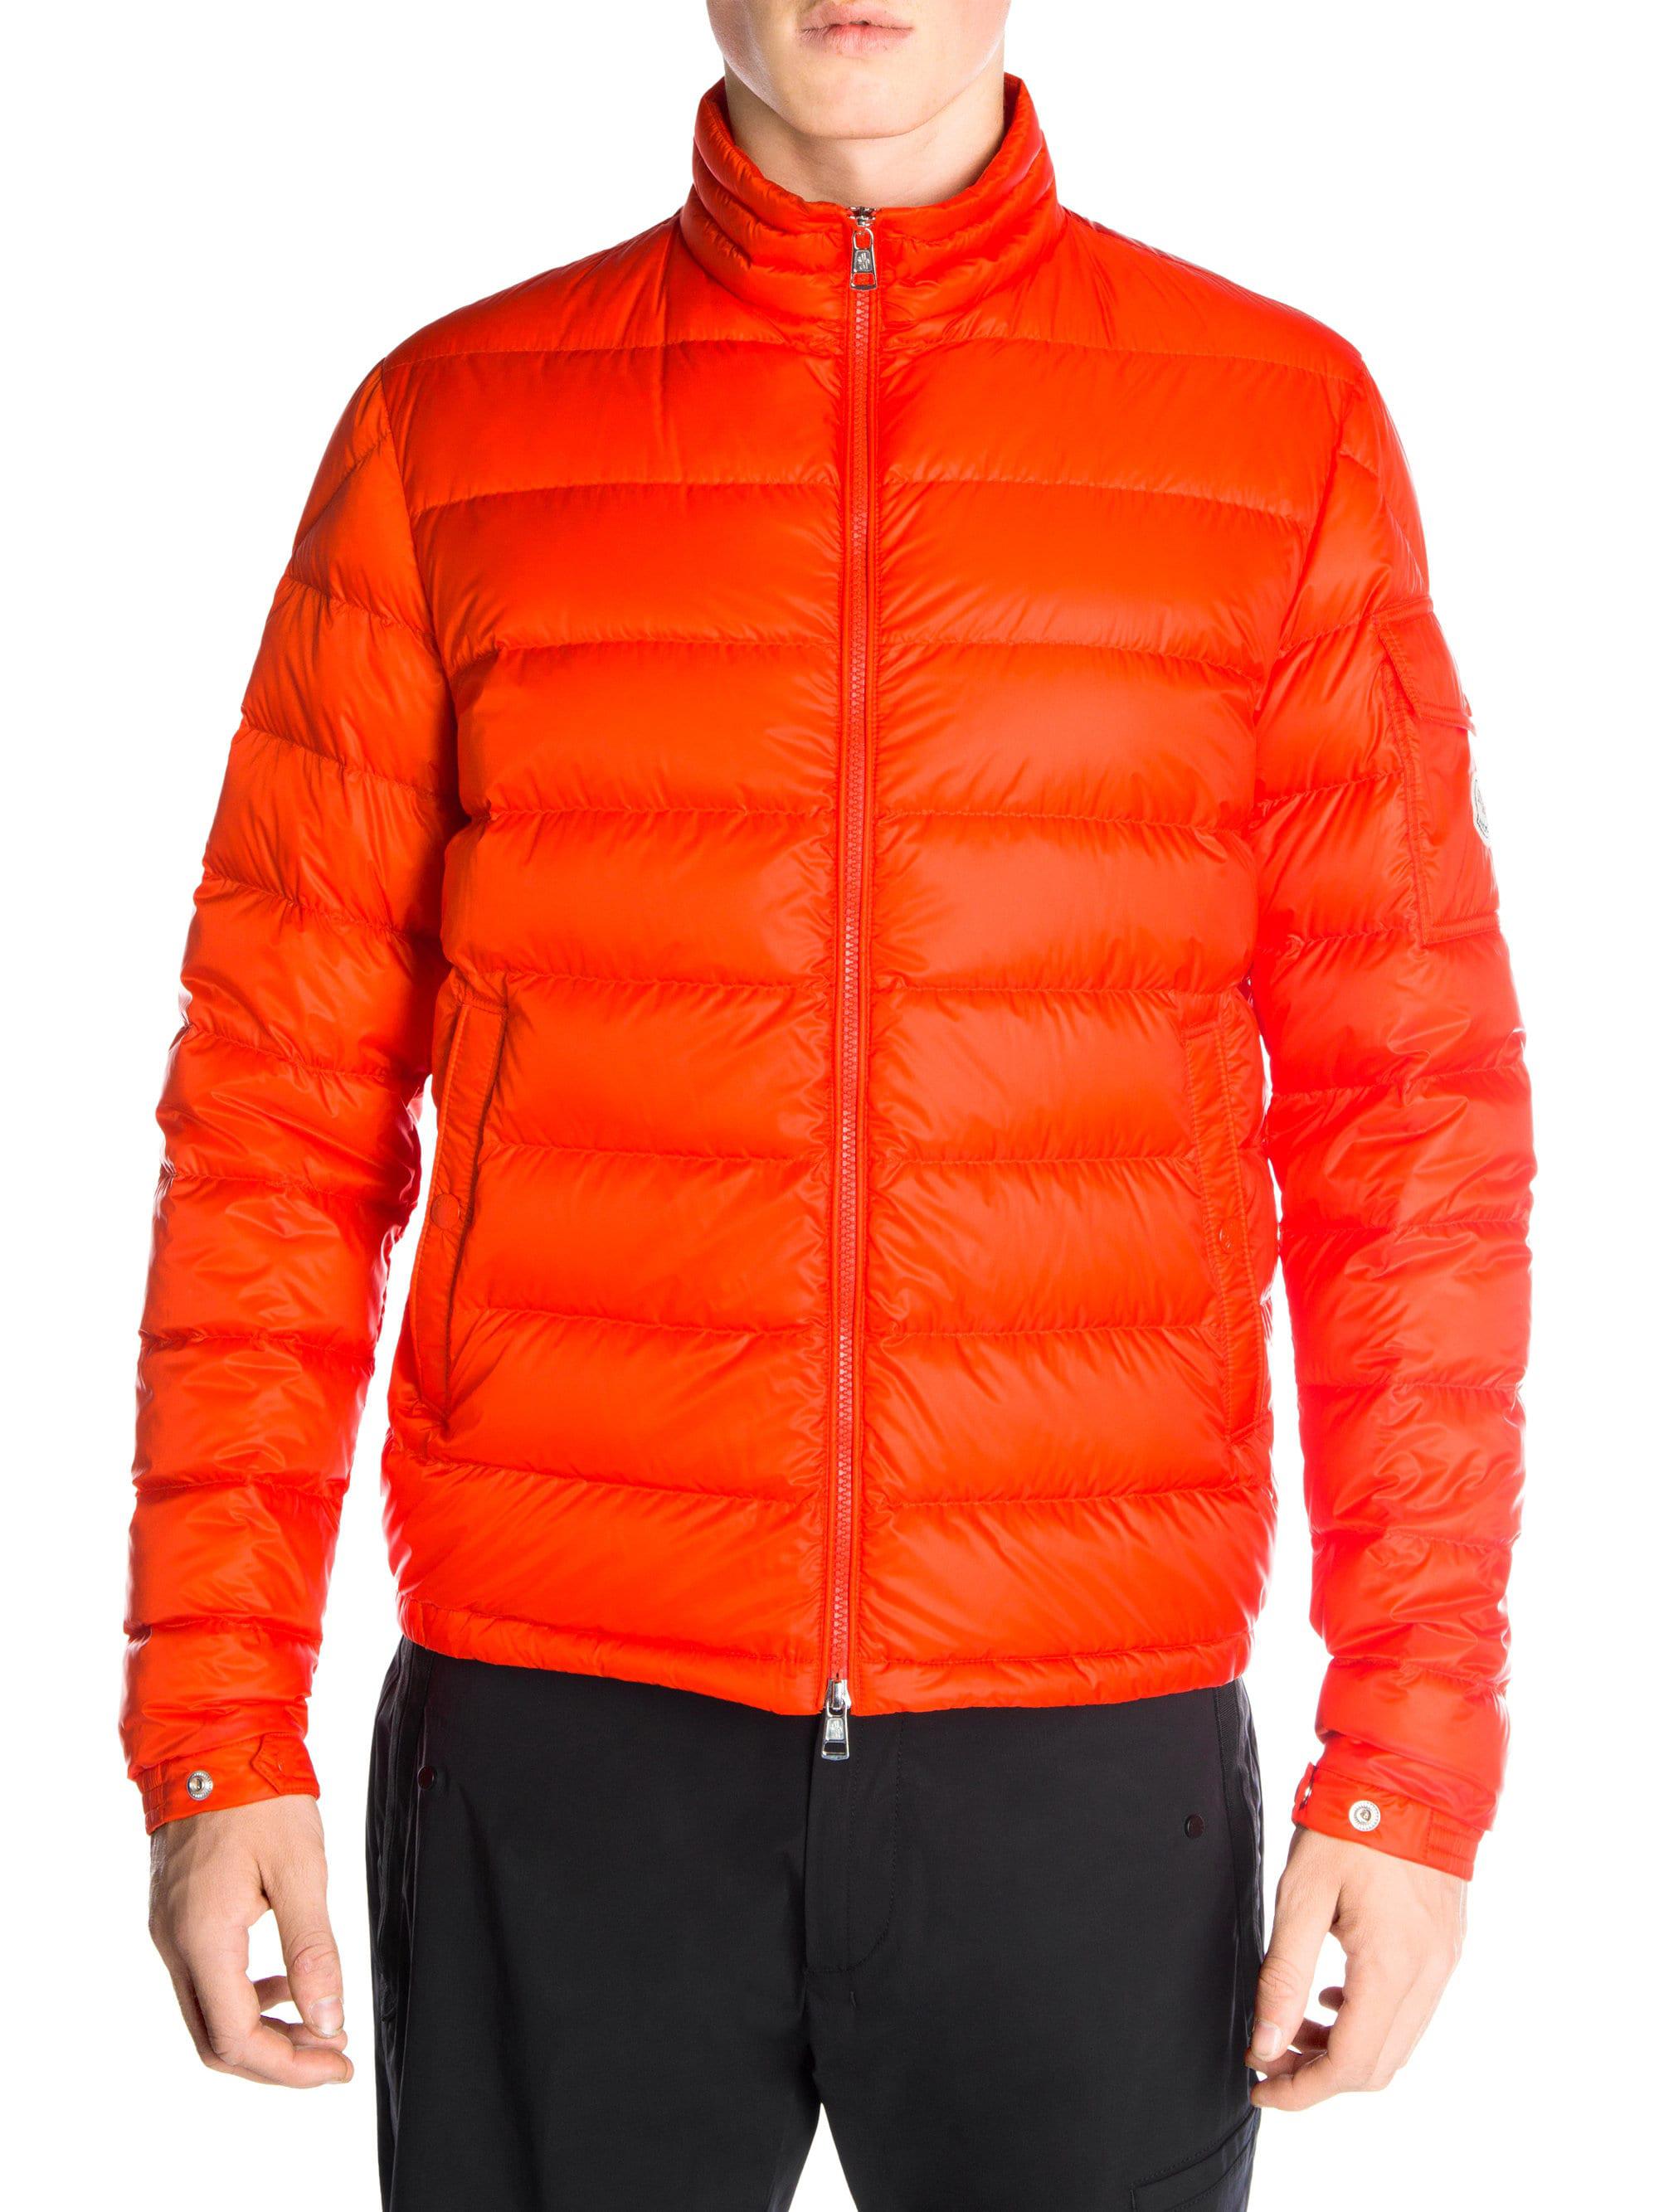 Moncler Synthetic Lambot Down Puffer Jacket in Orange for Men - Lyst